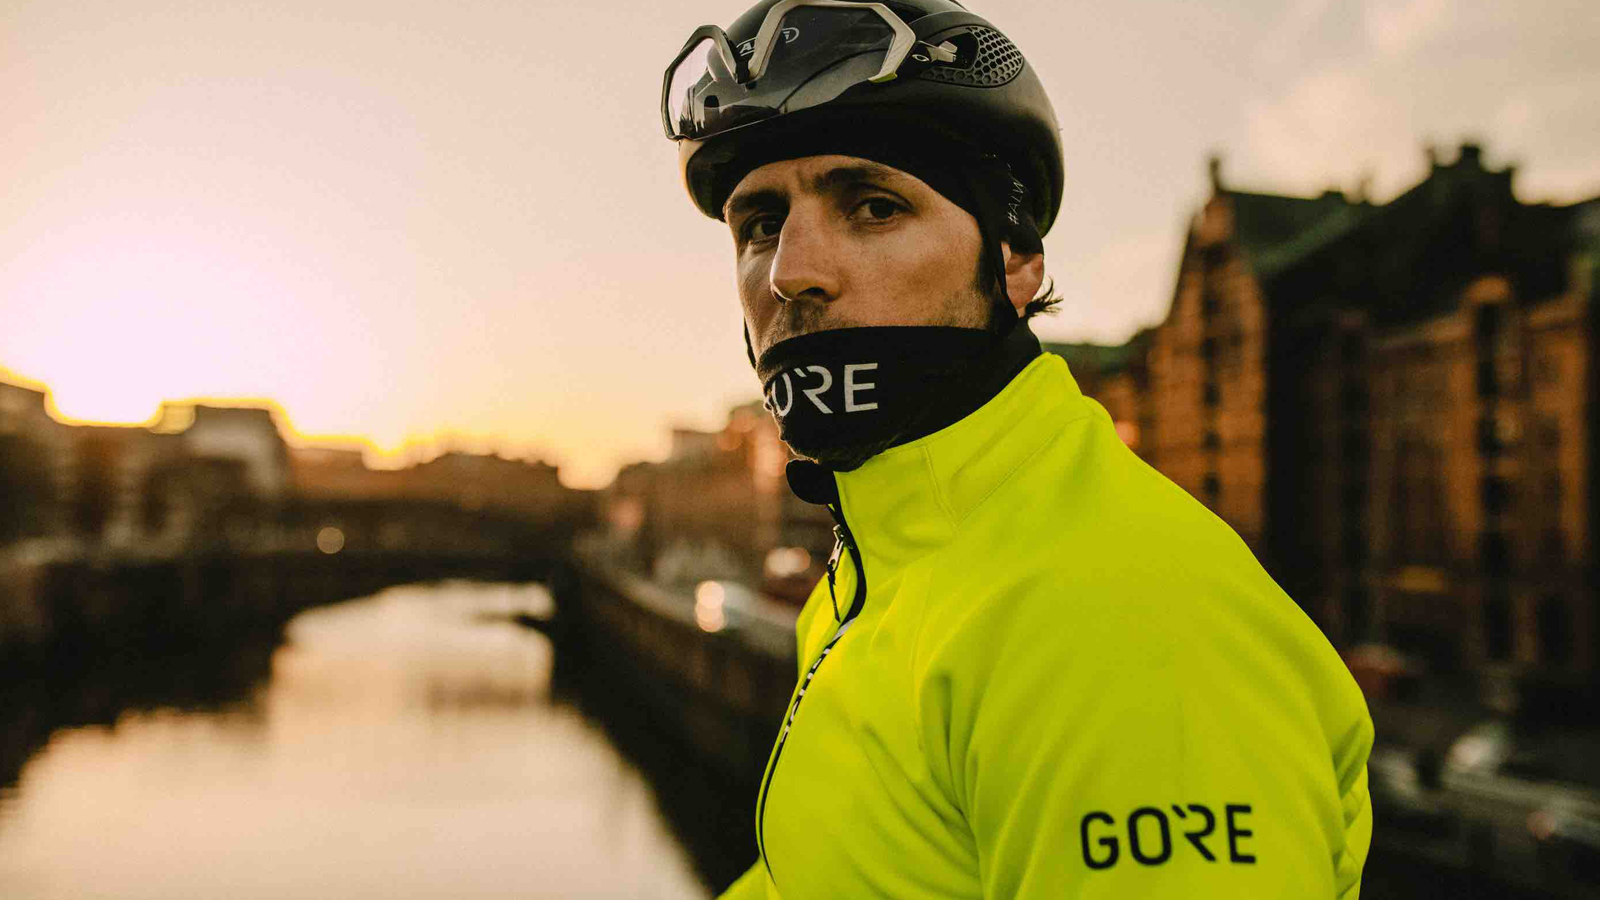 gore thermal cycling jacket > OFF-66%